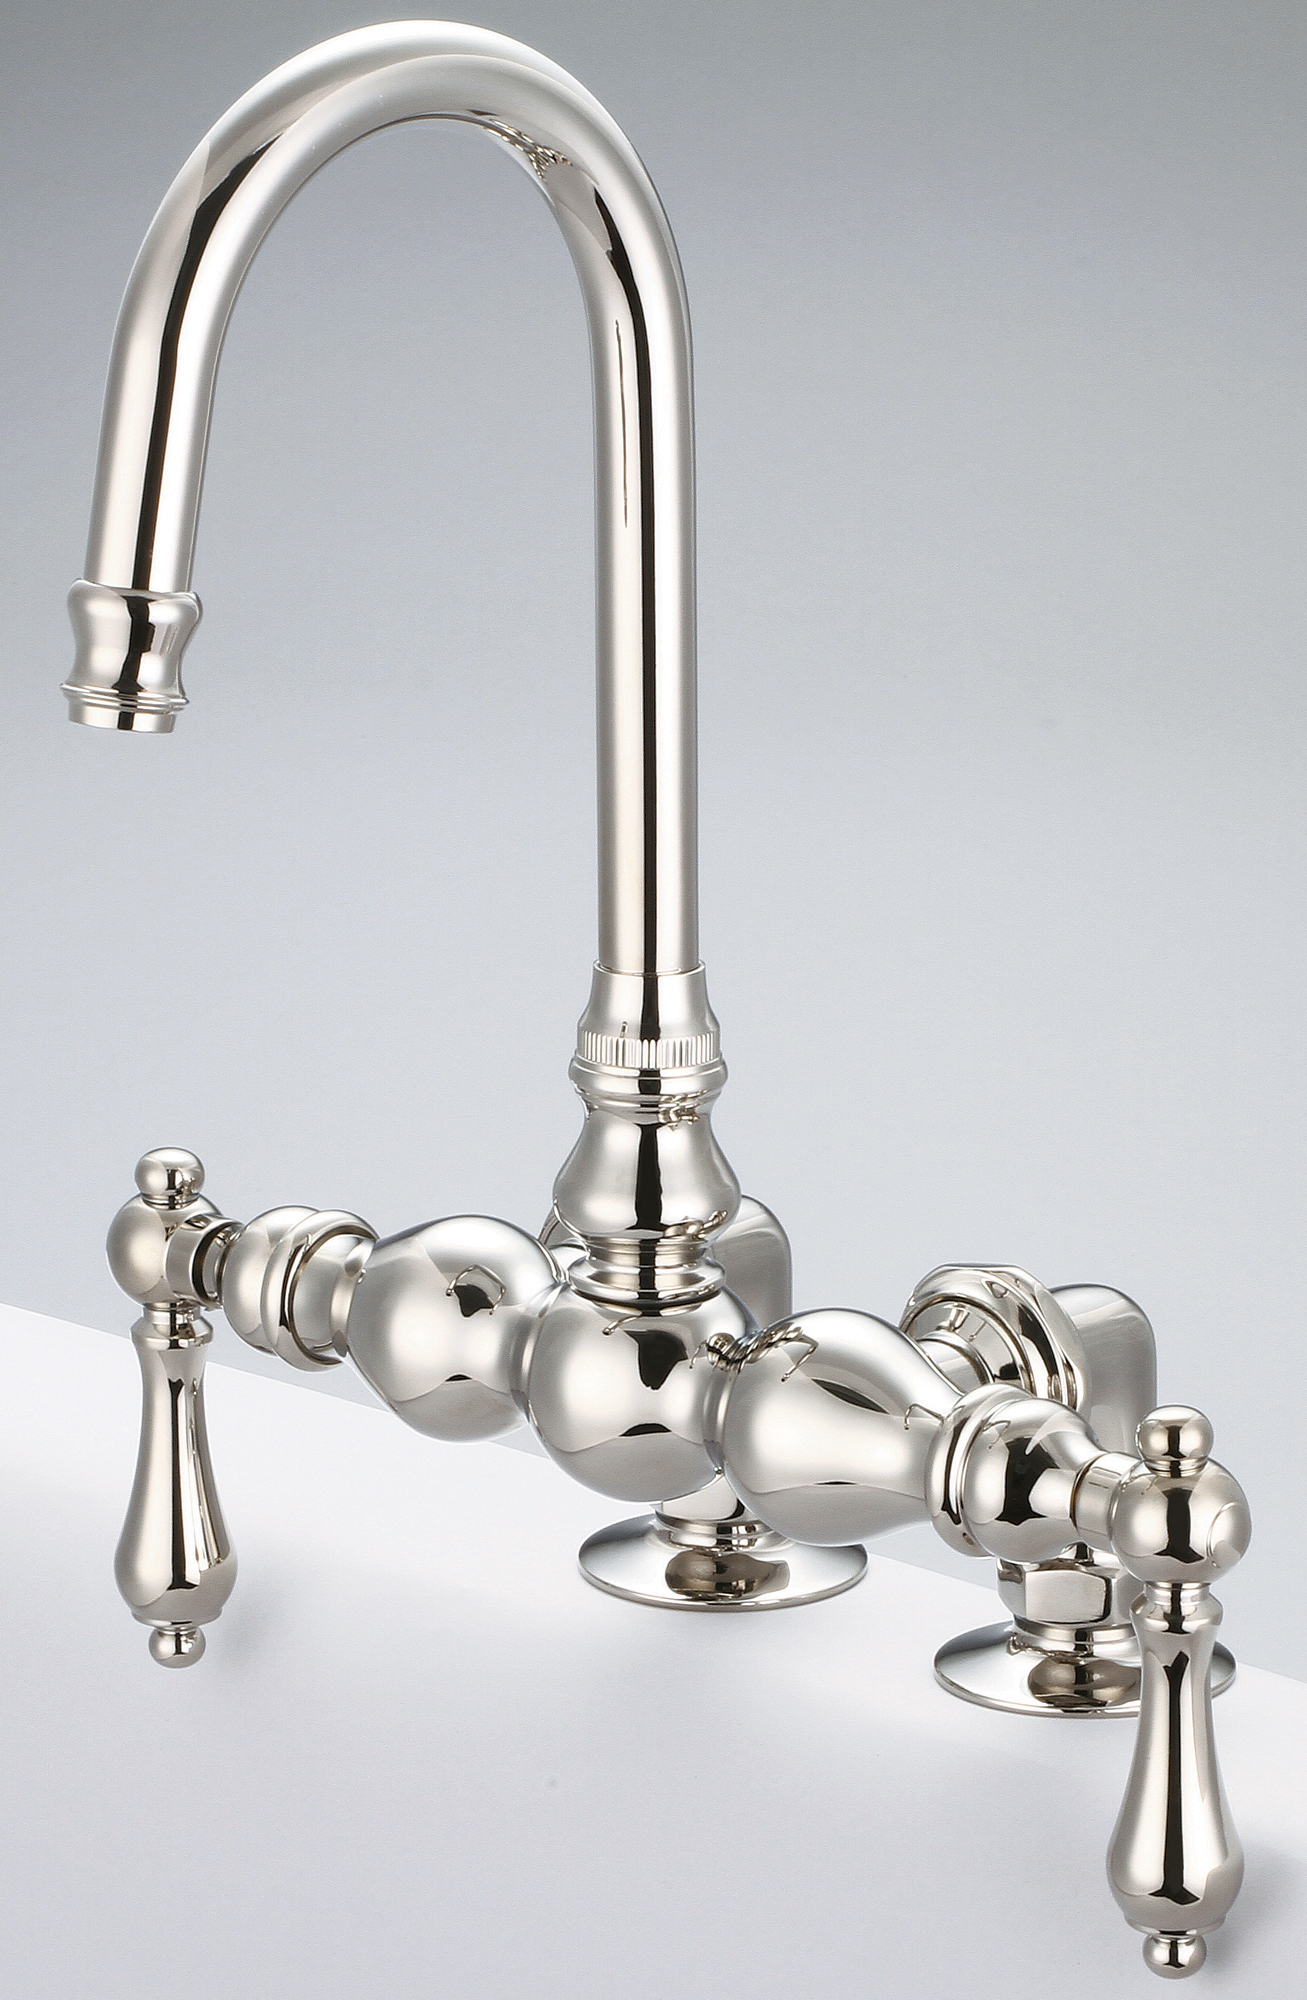 Vintage Classic 3.375 Inch Center Deck Mount Tub Faucet With Gooseneck Spout & 2 Inch Risers in Polished Nickel (PVD) Finish With Metal Lever Handles Without Labels